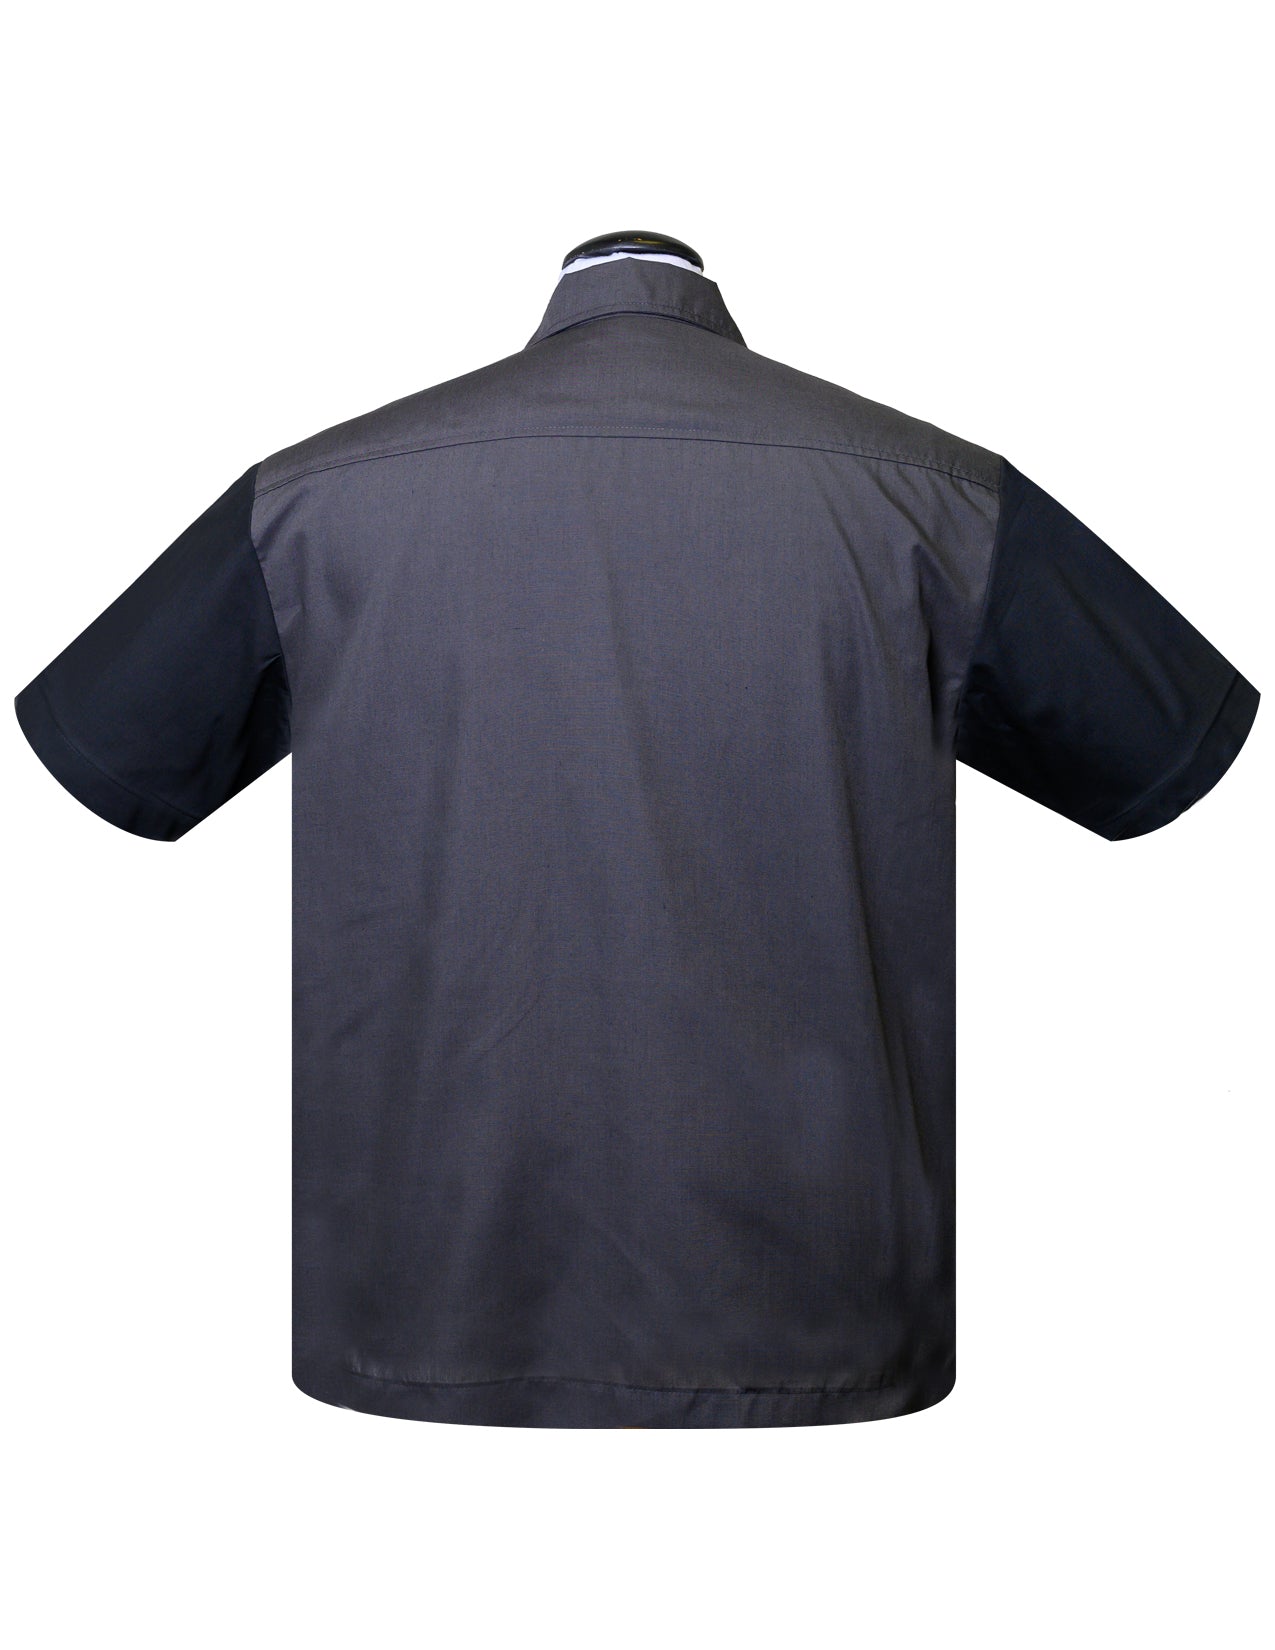 Poly Cotton Garage Shirt in Charcoal/Black